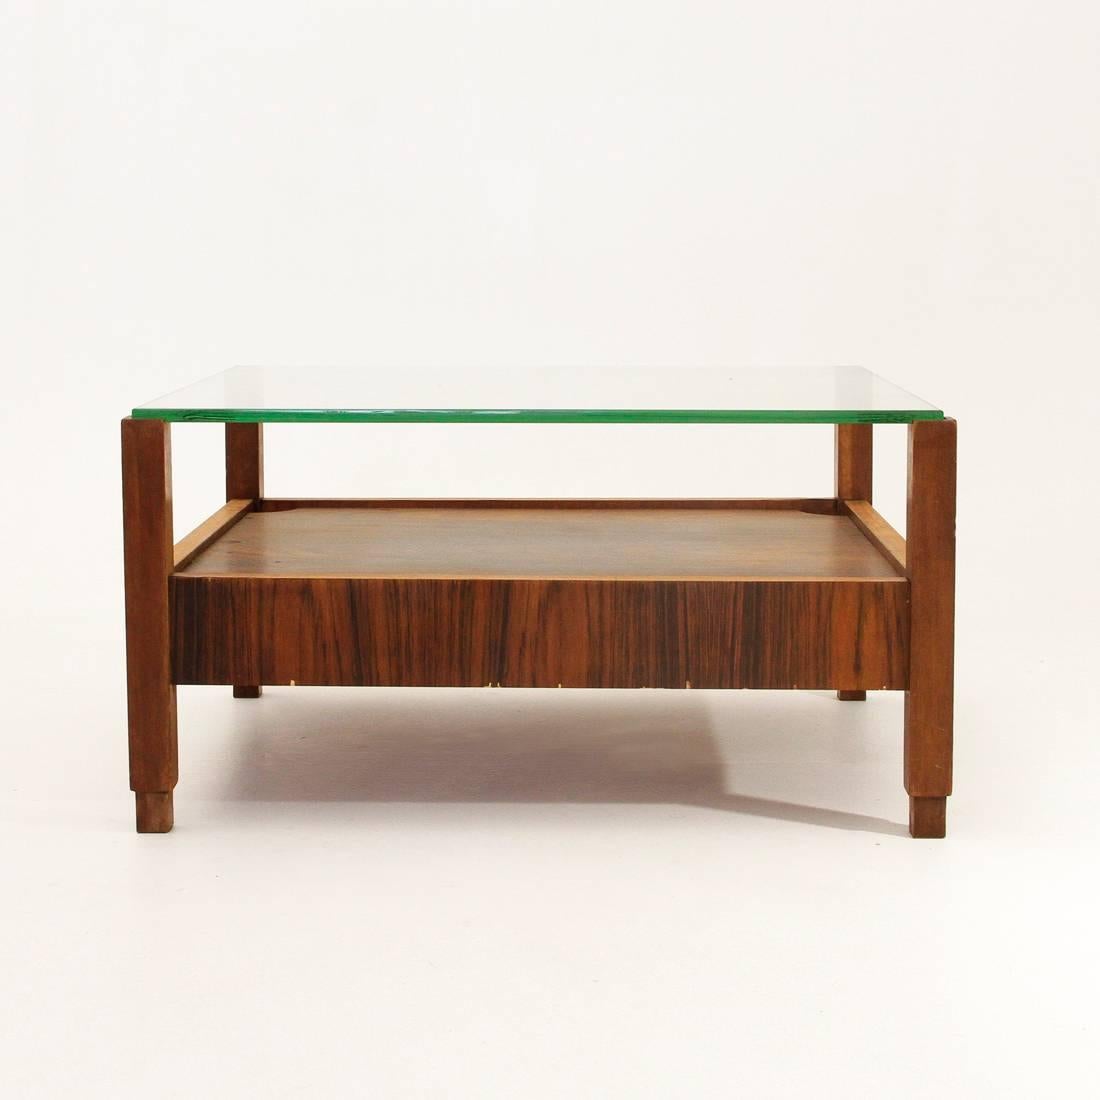 Italian coffee table from the 1960s.
Solid wood legs, bottom floor and lateral structures, veneered wood.
Top floor in thick glass.
Good general condition, some signs and shortcomings of veneer.

Dimensions: Width cm 75 cm, depth 65 cm, height